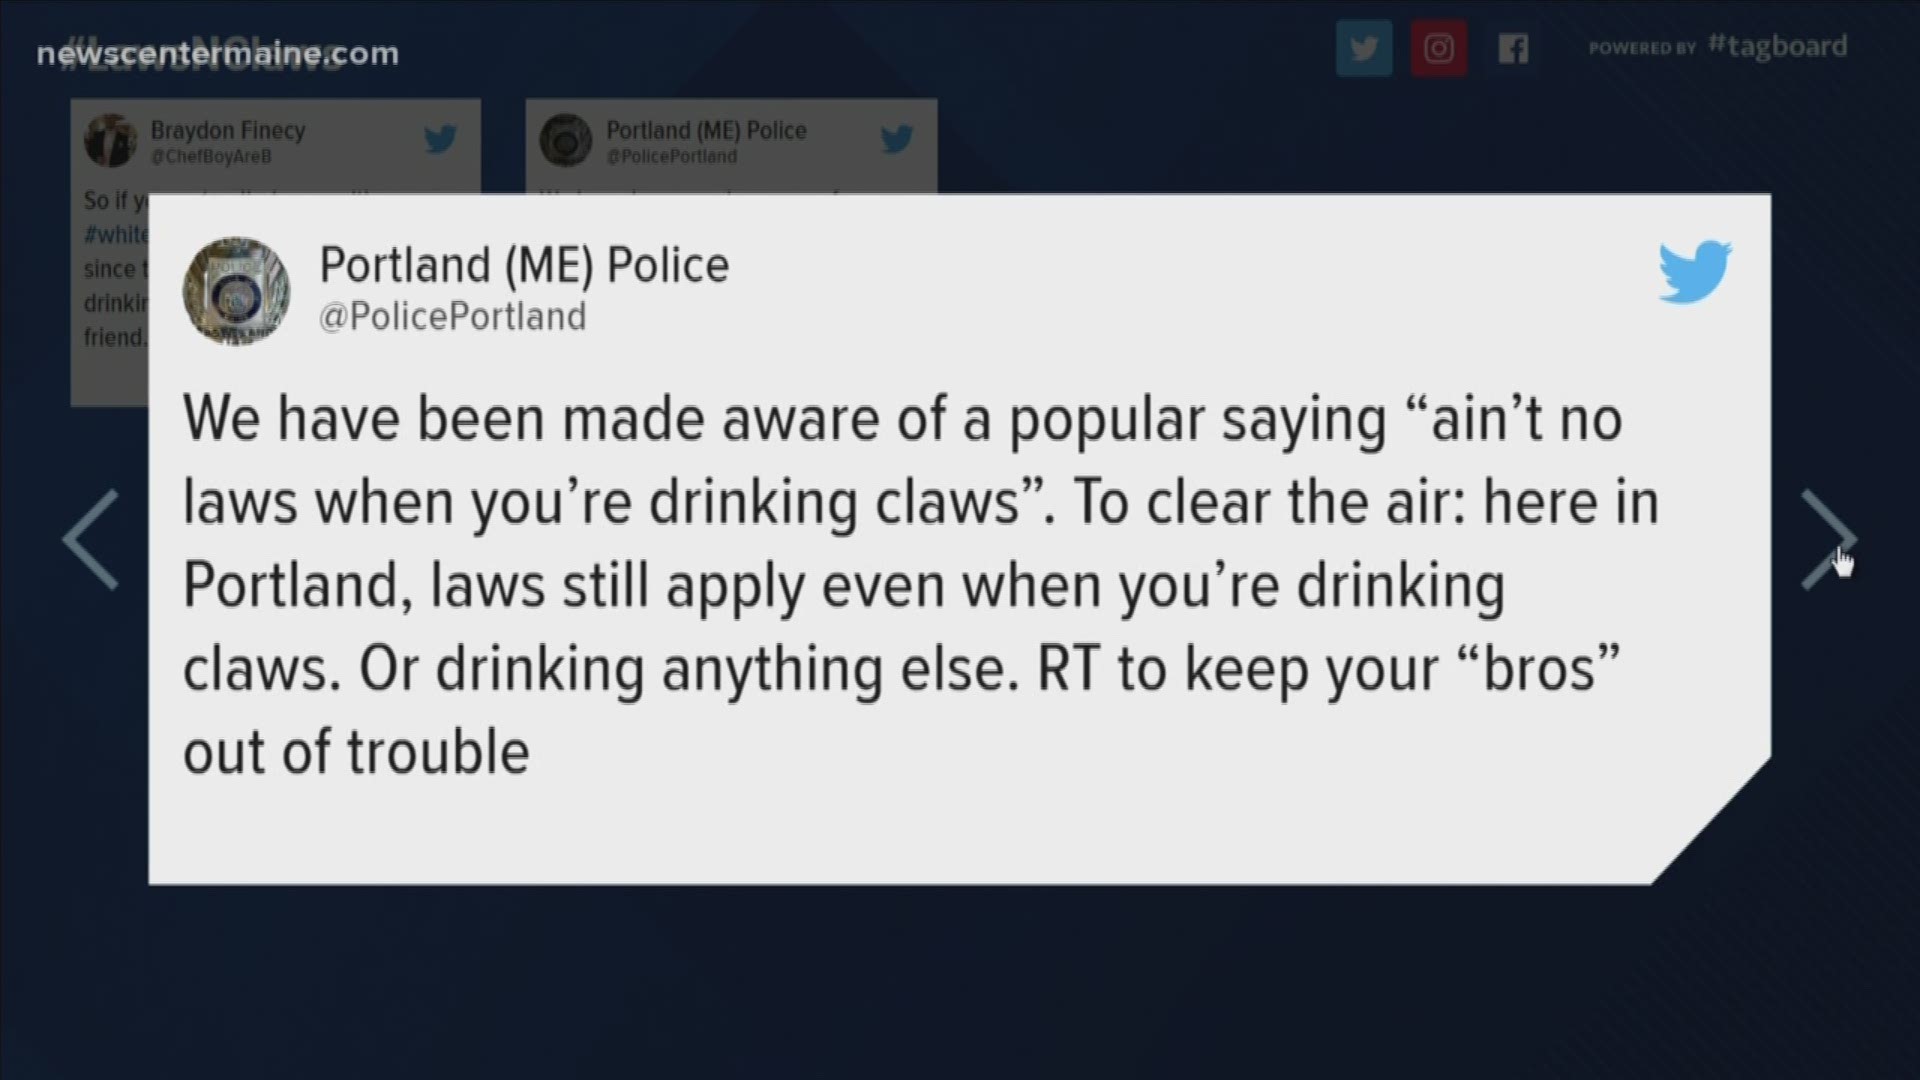 The Portland Police Department is reminding Mainers that there are still laws, even when you're drinking White Claw Hard Seltzer.